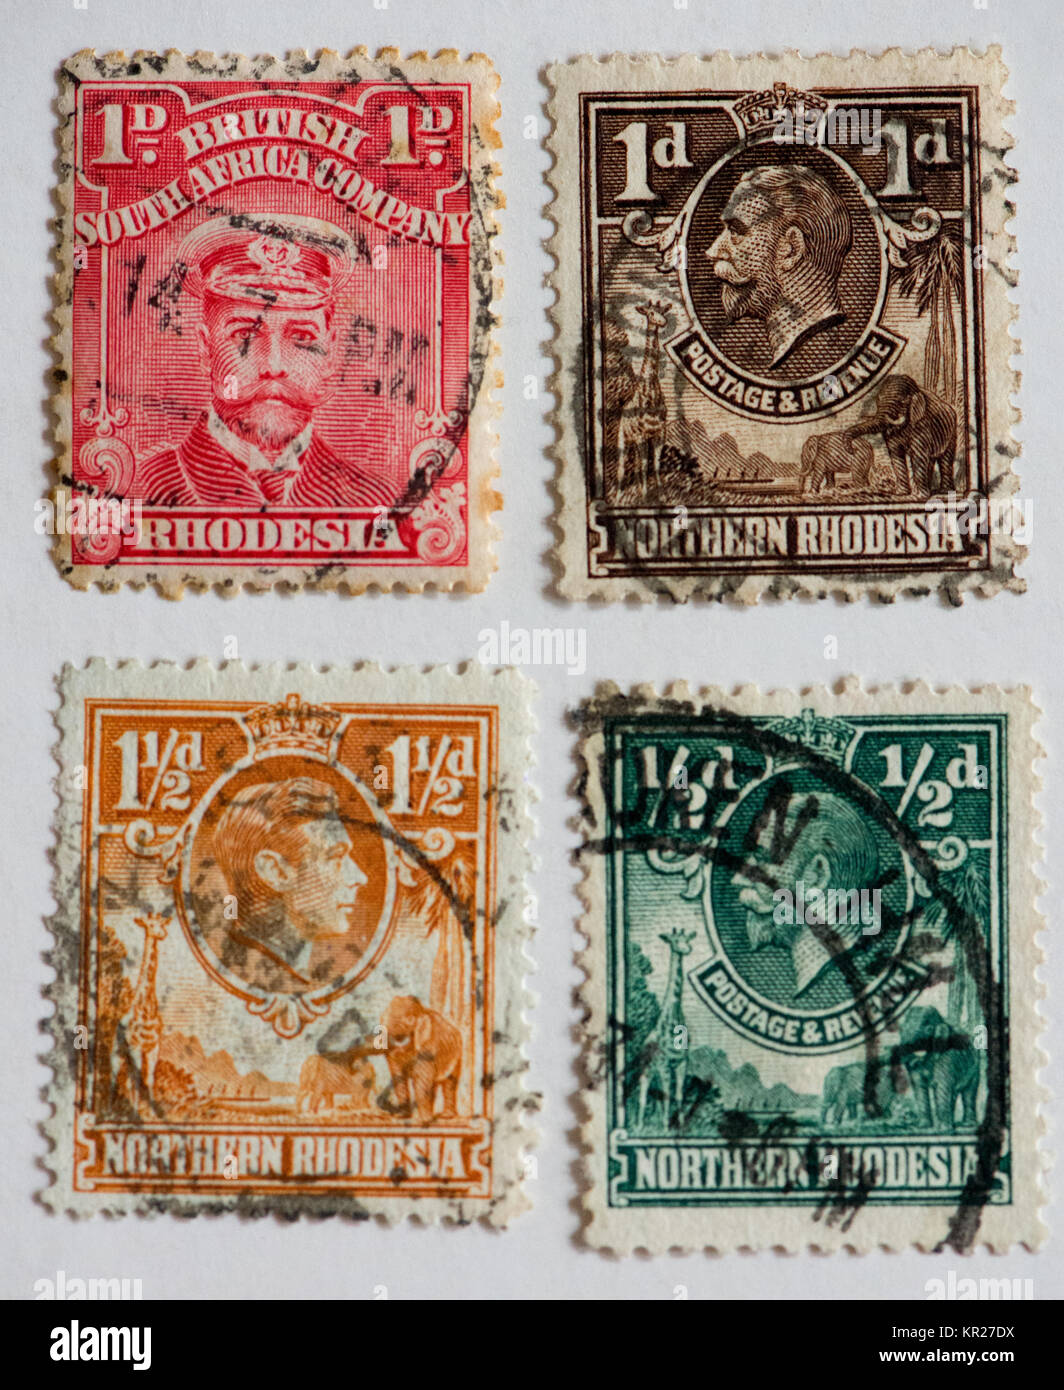 british stamps from former colonies Rhodesia, Southern and Northern Rhodesia Stock Photo